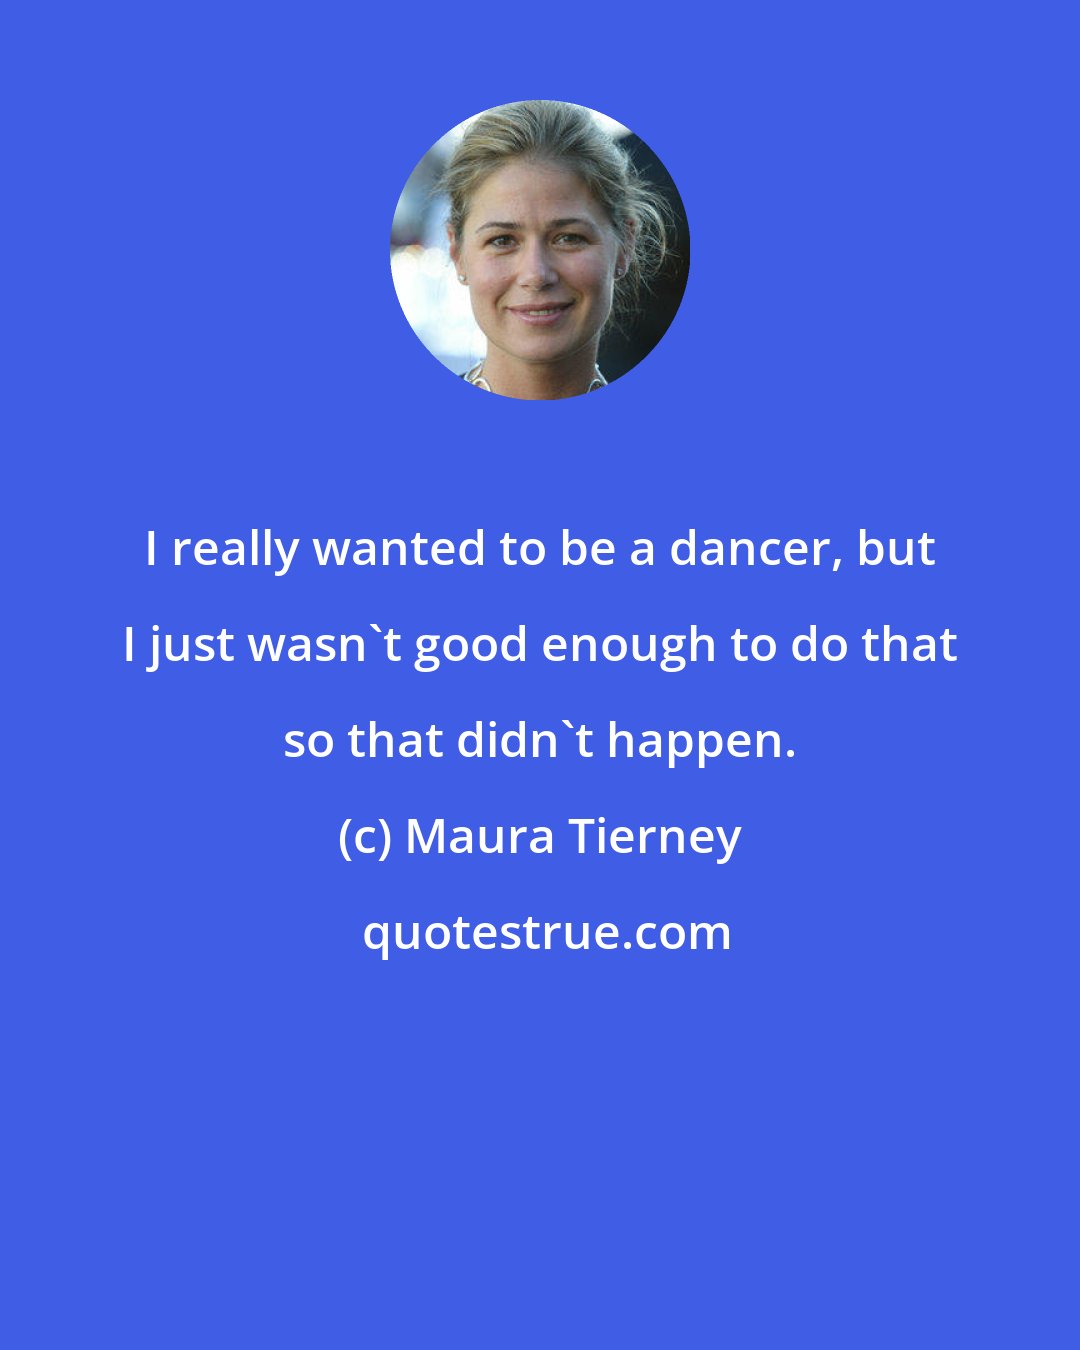 Maura Tierney: I really wanted to be a dancer, but I just wasn't good enough to do that so that didn't happen.